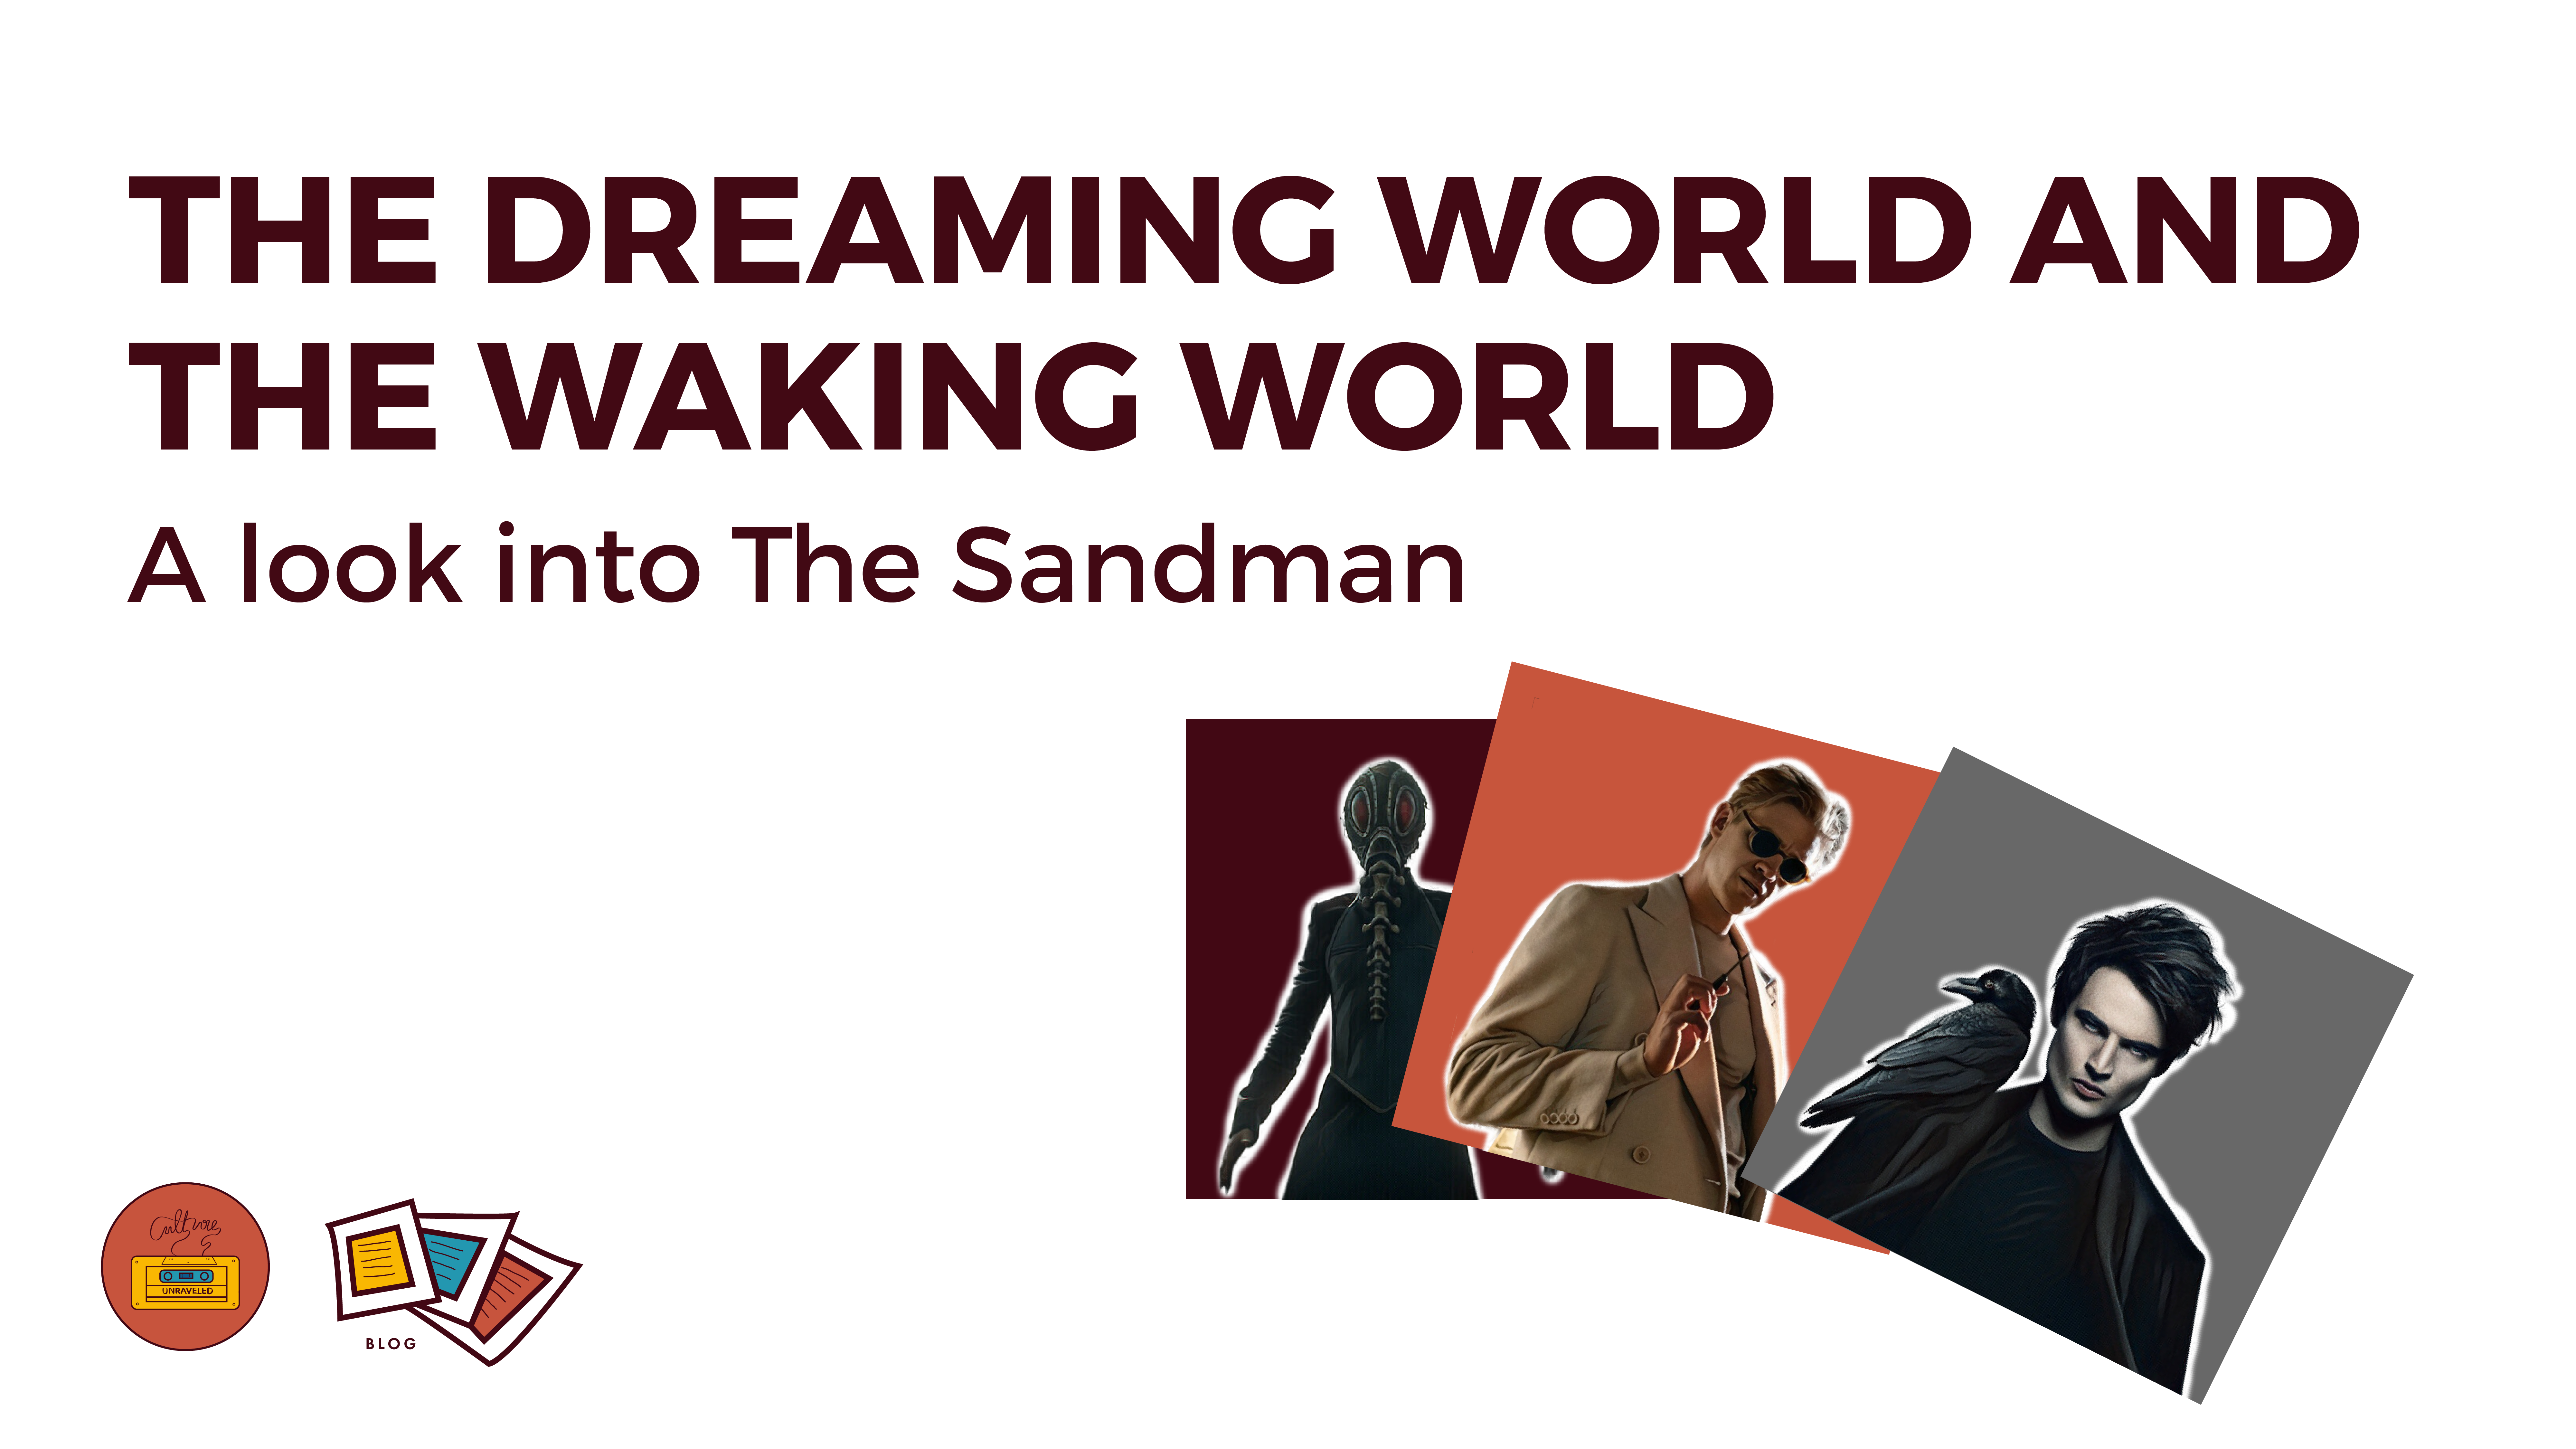 The Dreaming World and The Waking World. A Look into The Sandman